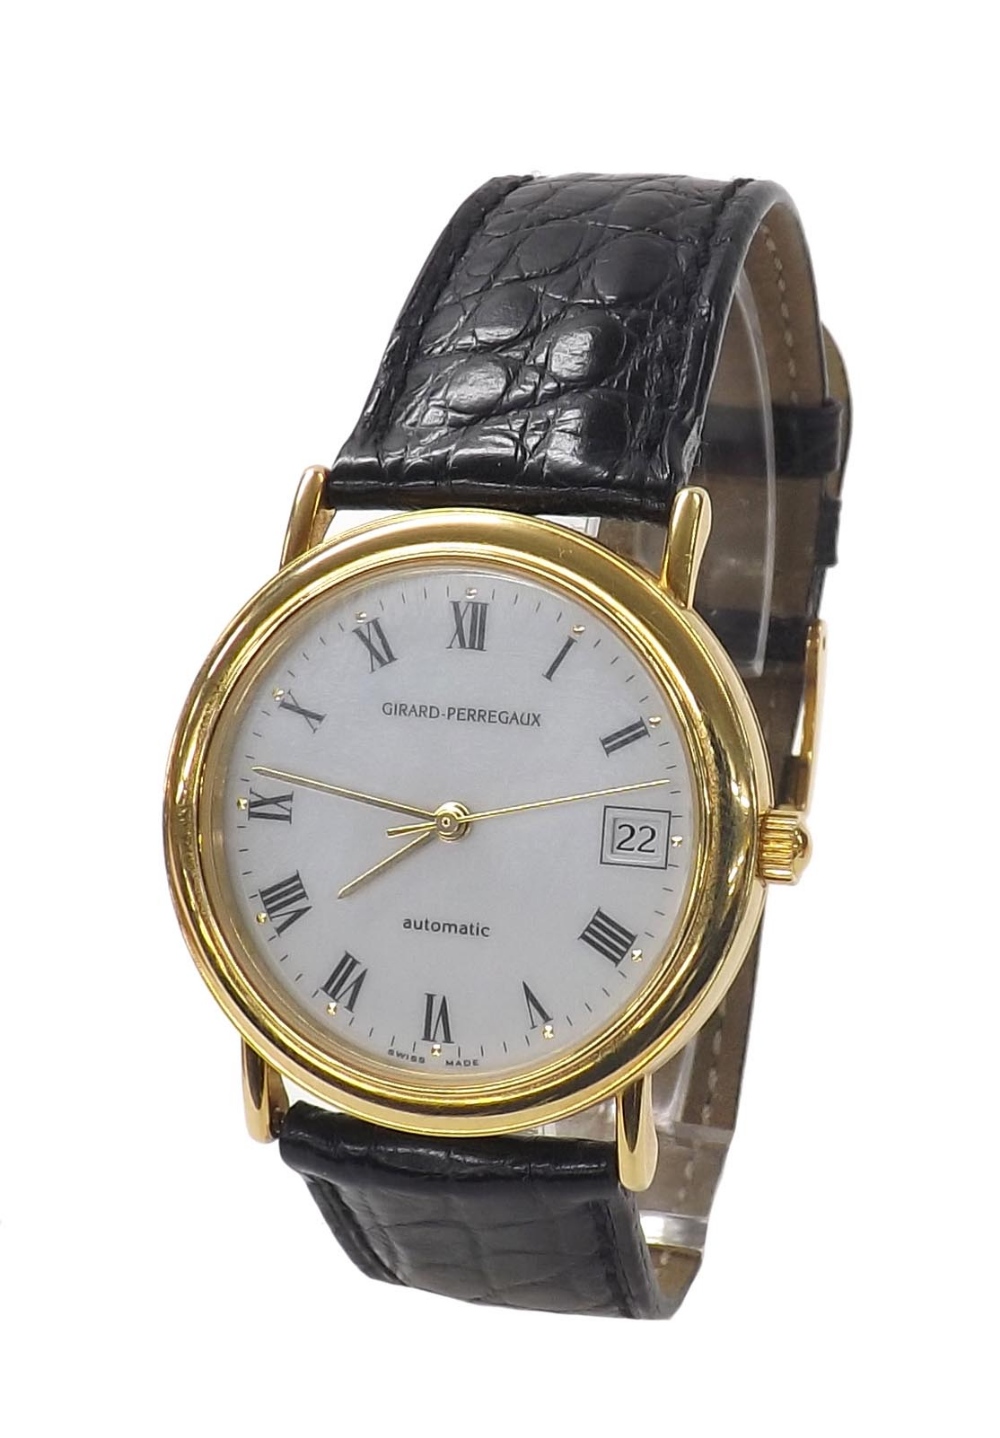 Girard-Perregaux automatic 18ct gentleman's wristwatch, ref. 4799, white dial with Roman numerals, - Image 2 of 5